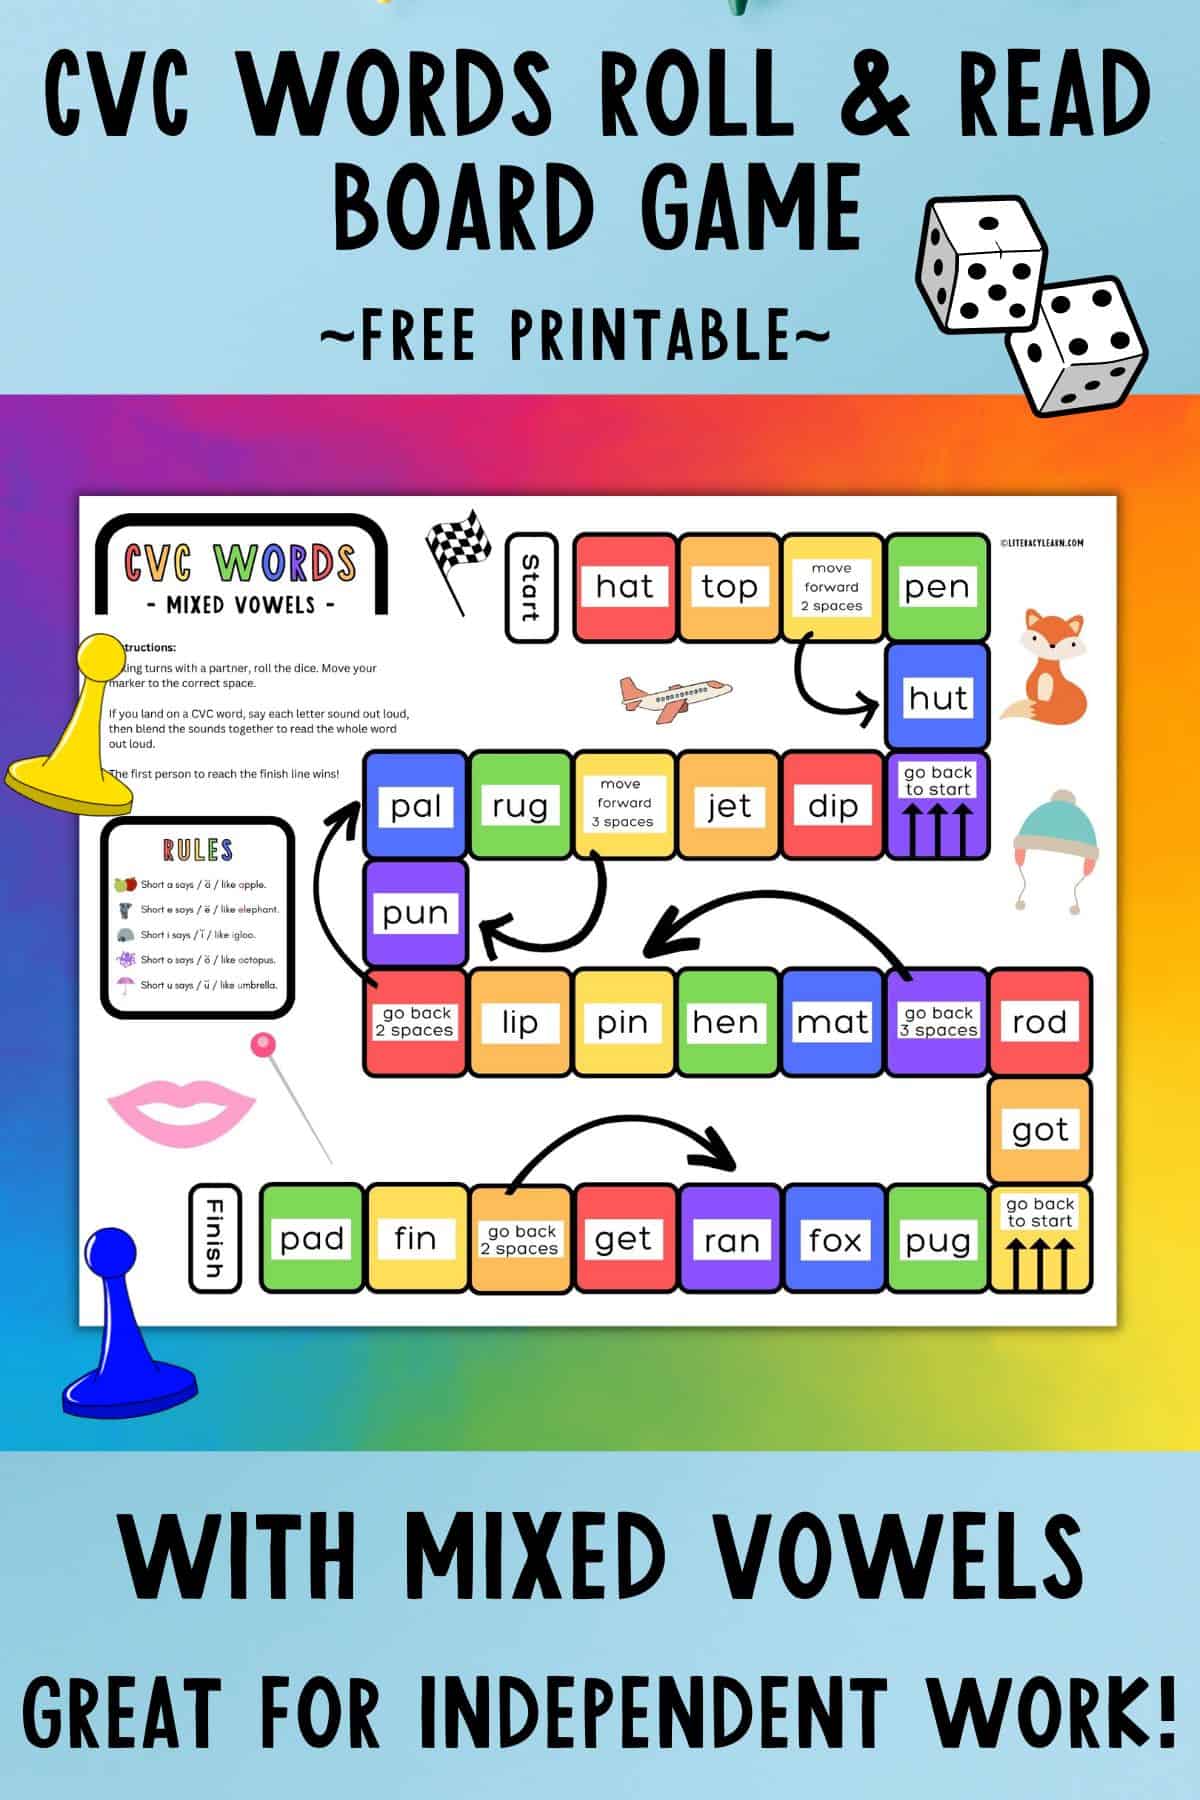 Pinterest graphic with the CVC Words Board game and a dice.